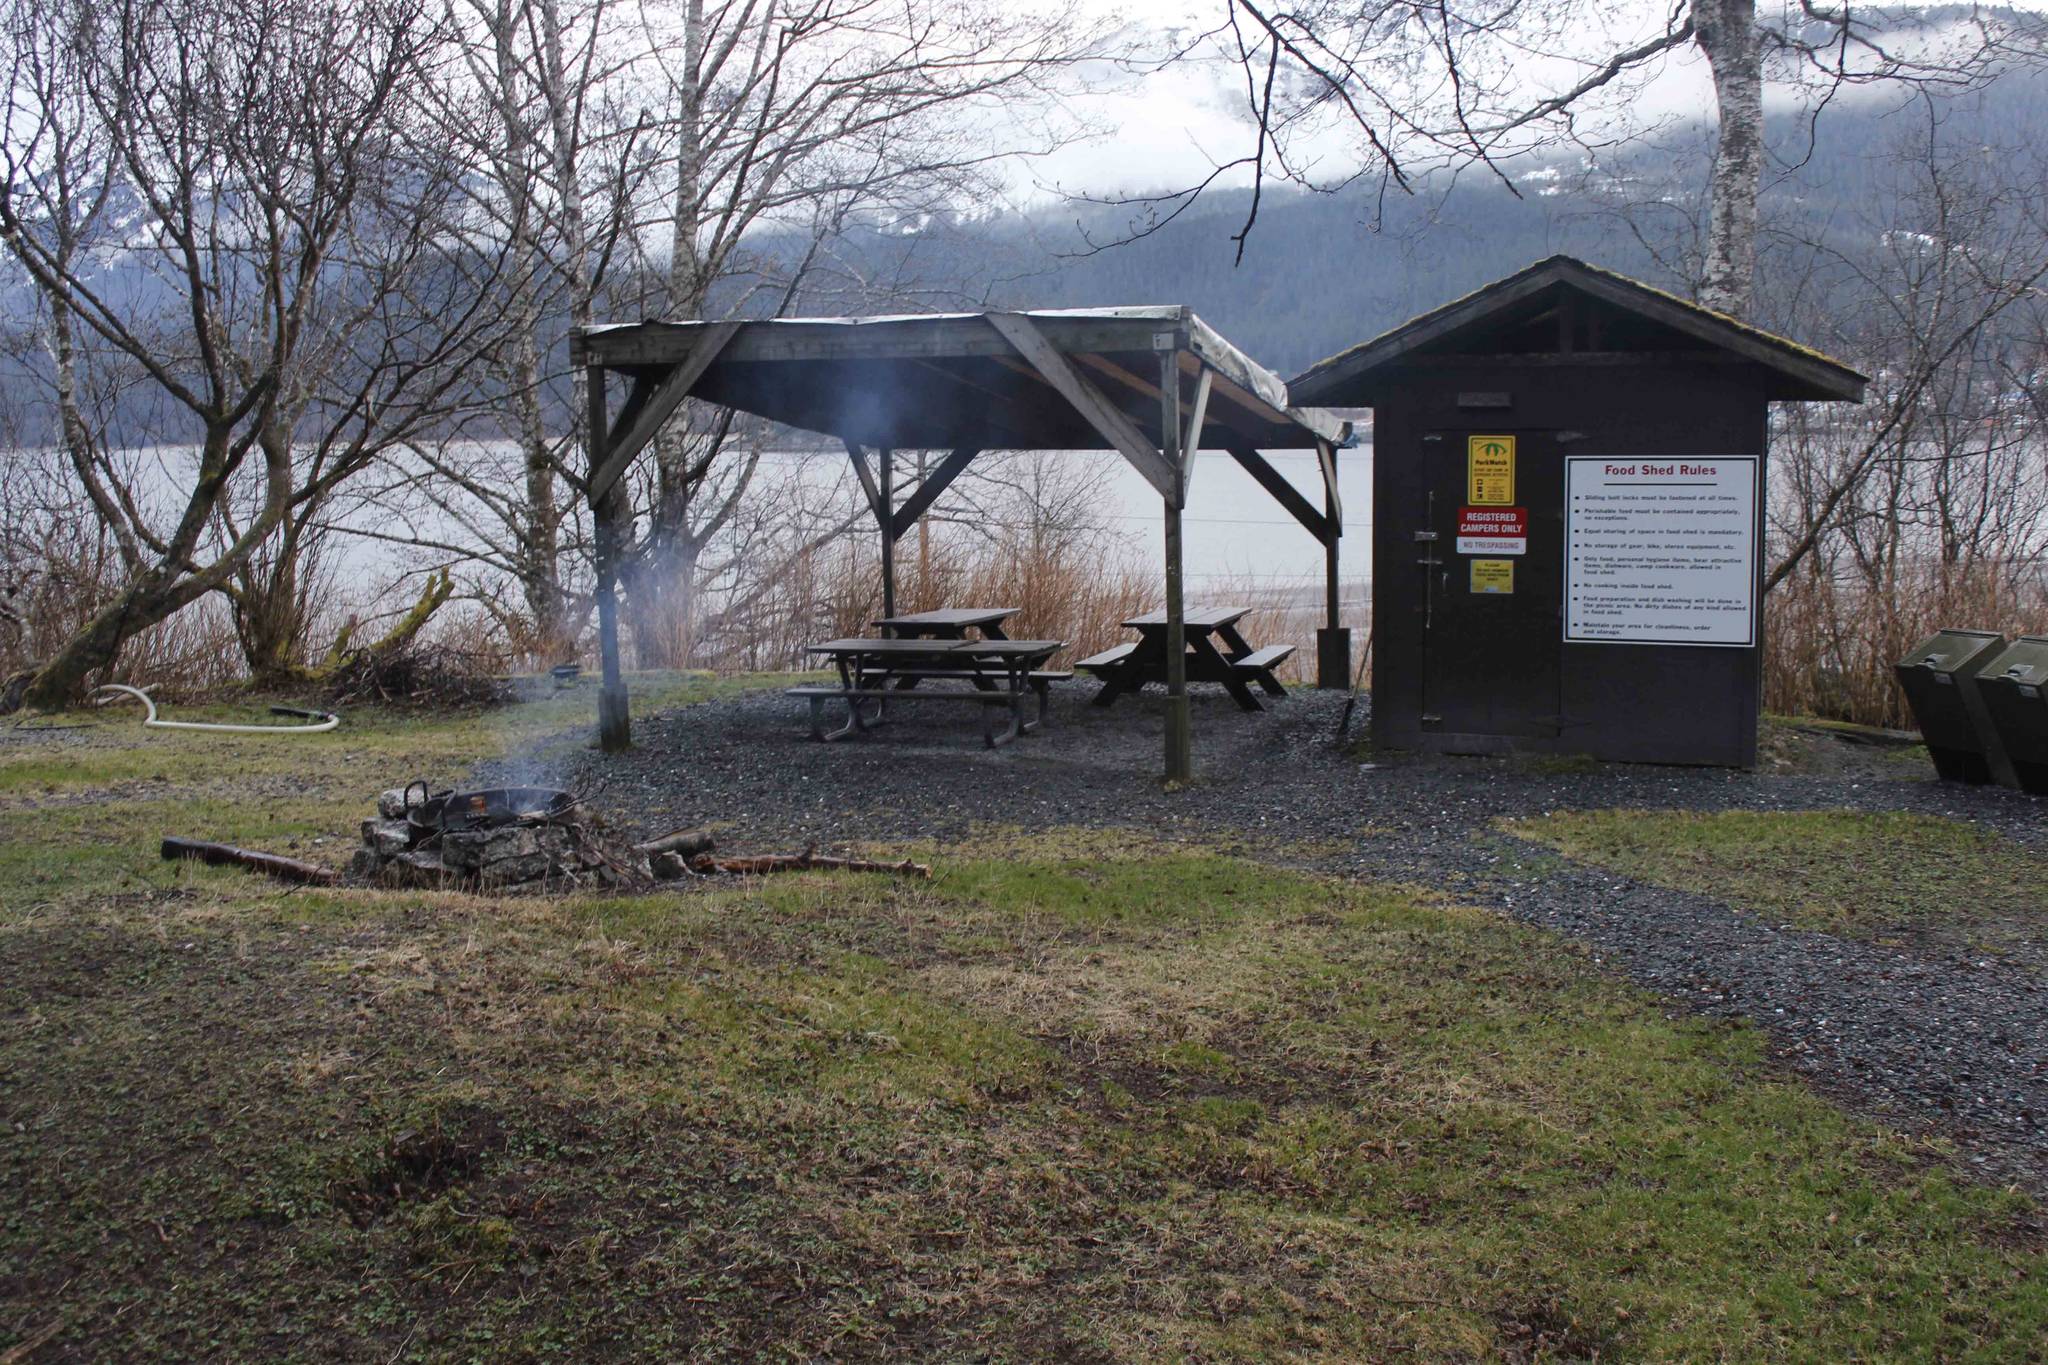 Thane Campground sat empty, save for a small fire, on its first day of operation Saturday. The city is hoping that the campground serves as a spot for homeless to stay. Alex McCarthy | Juneau Empire